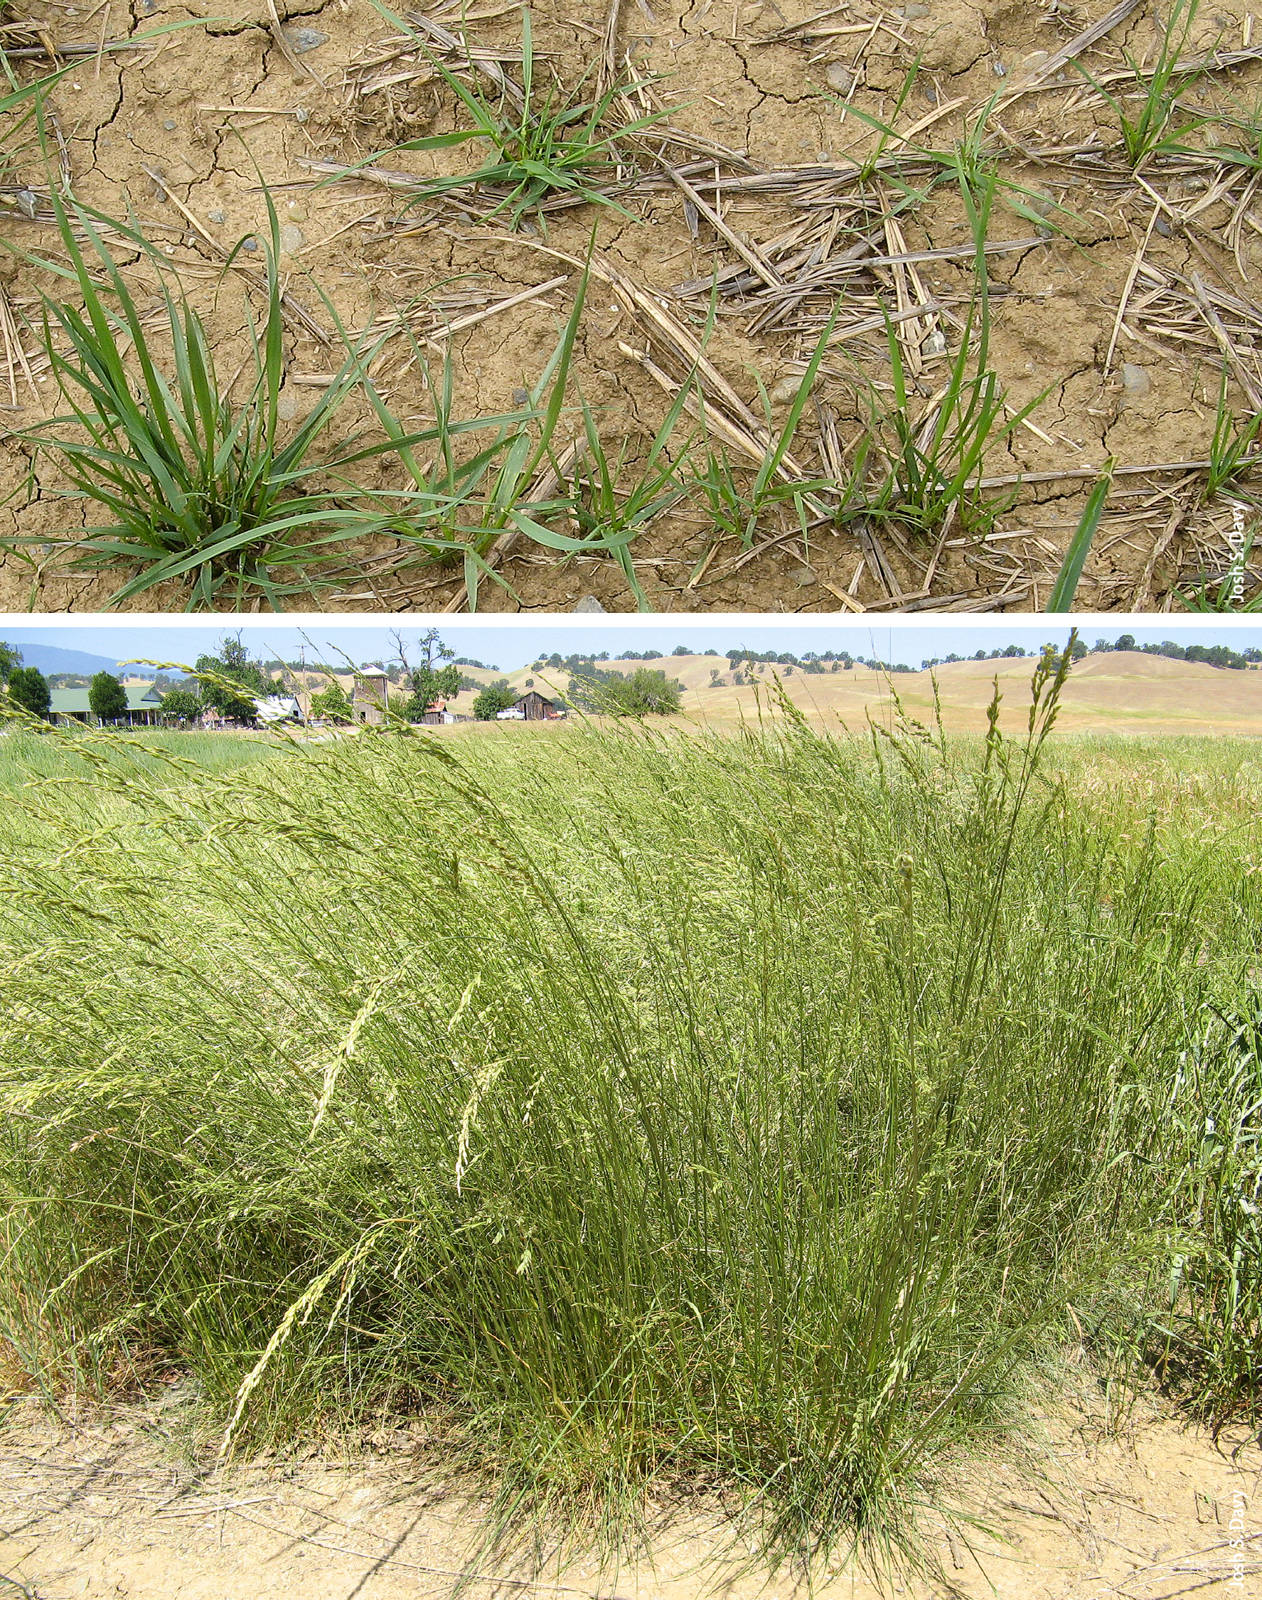 Perennial grasses such as Flecha tall fescue produce abundant forage and also provide a more stable ground cover for a longer period than annuals. Top, seedling Flecha tall fescue at the end of the first growing season (May 2010); bottom, established Flecha tall fescue (May 2013).